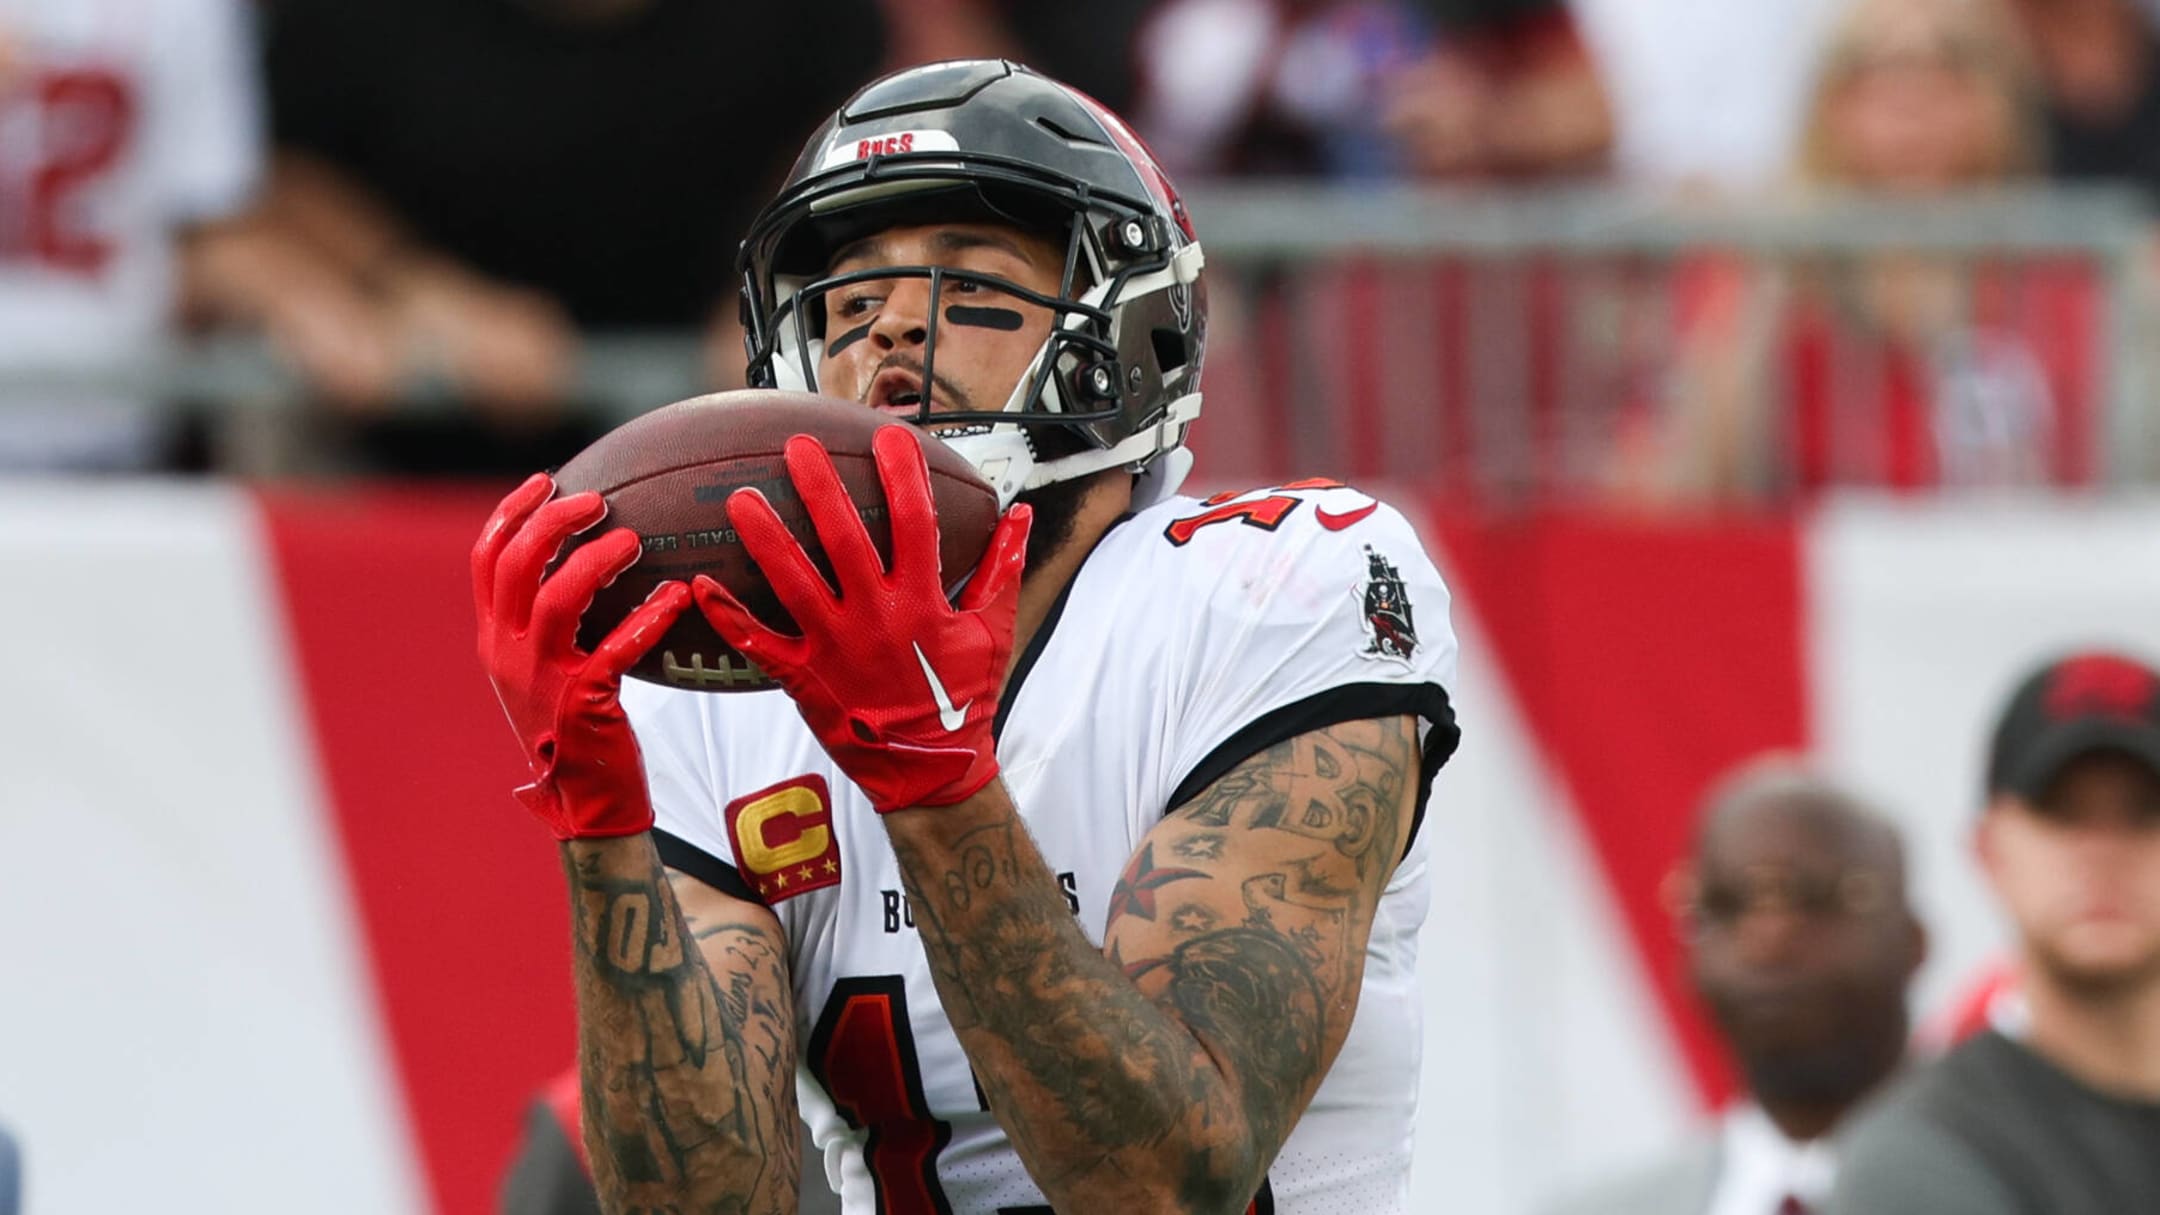 Bucs receiver Mike Evans will play tonight vs. Bears